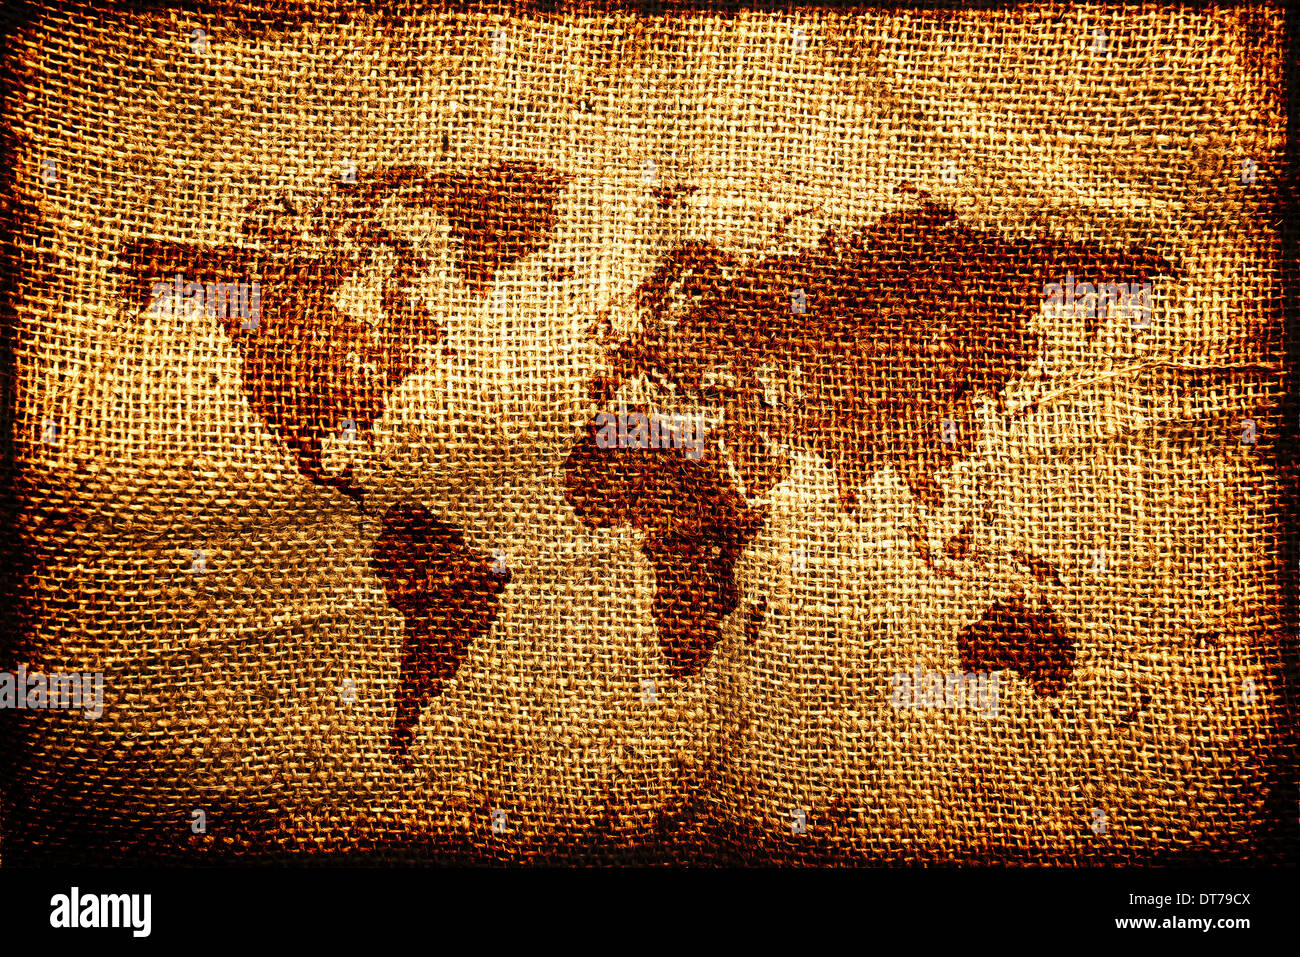 Old world map on hesian sack, natural jute canvas texture. Stock Photo